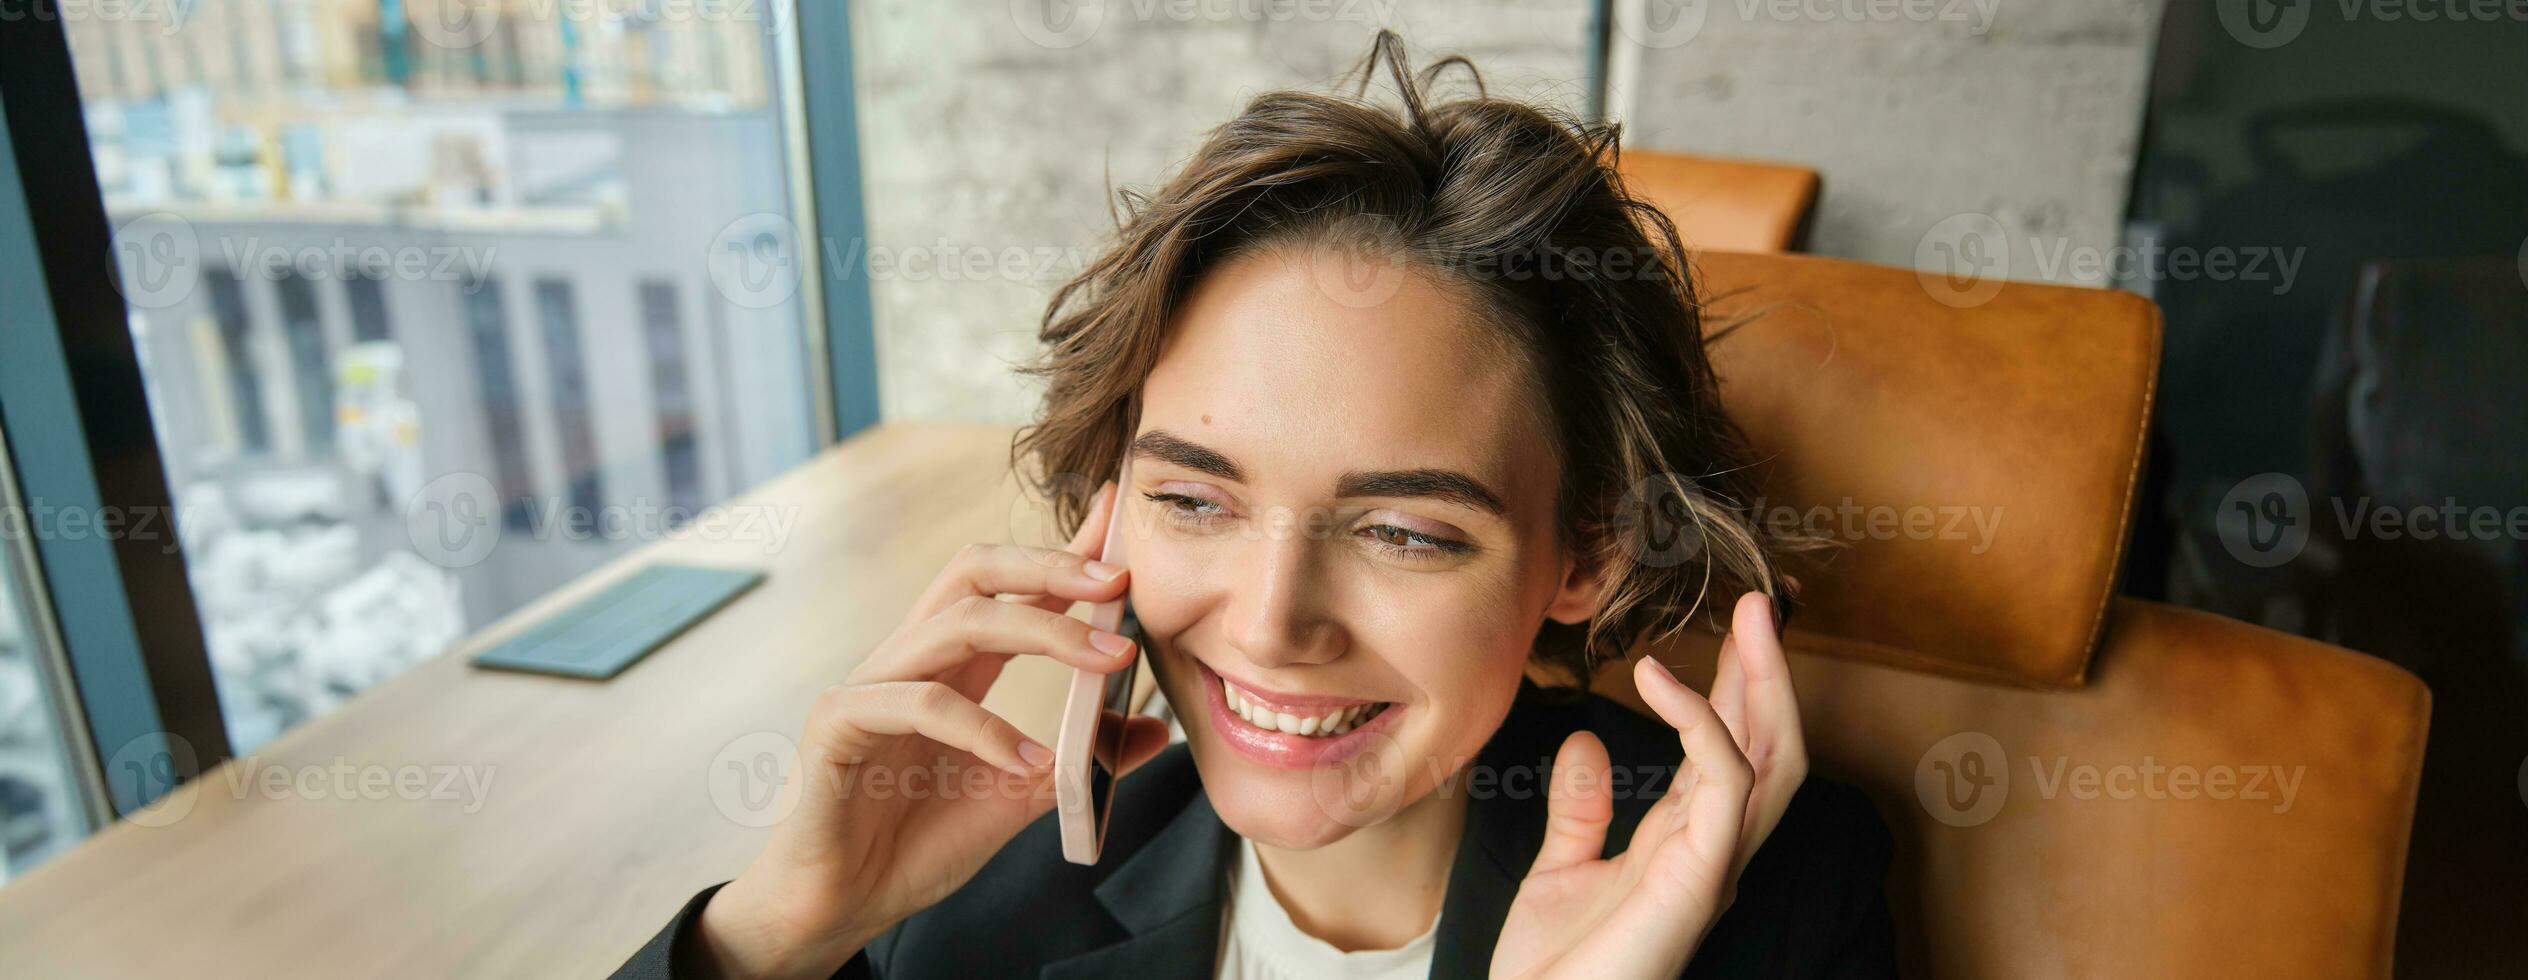 Image of successful woman talking on mobile phone, having a conversation over the telephone, answering client, sitting and working in an office photo